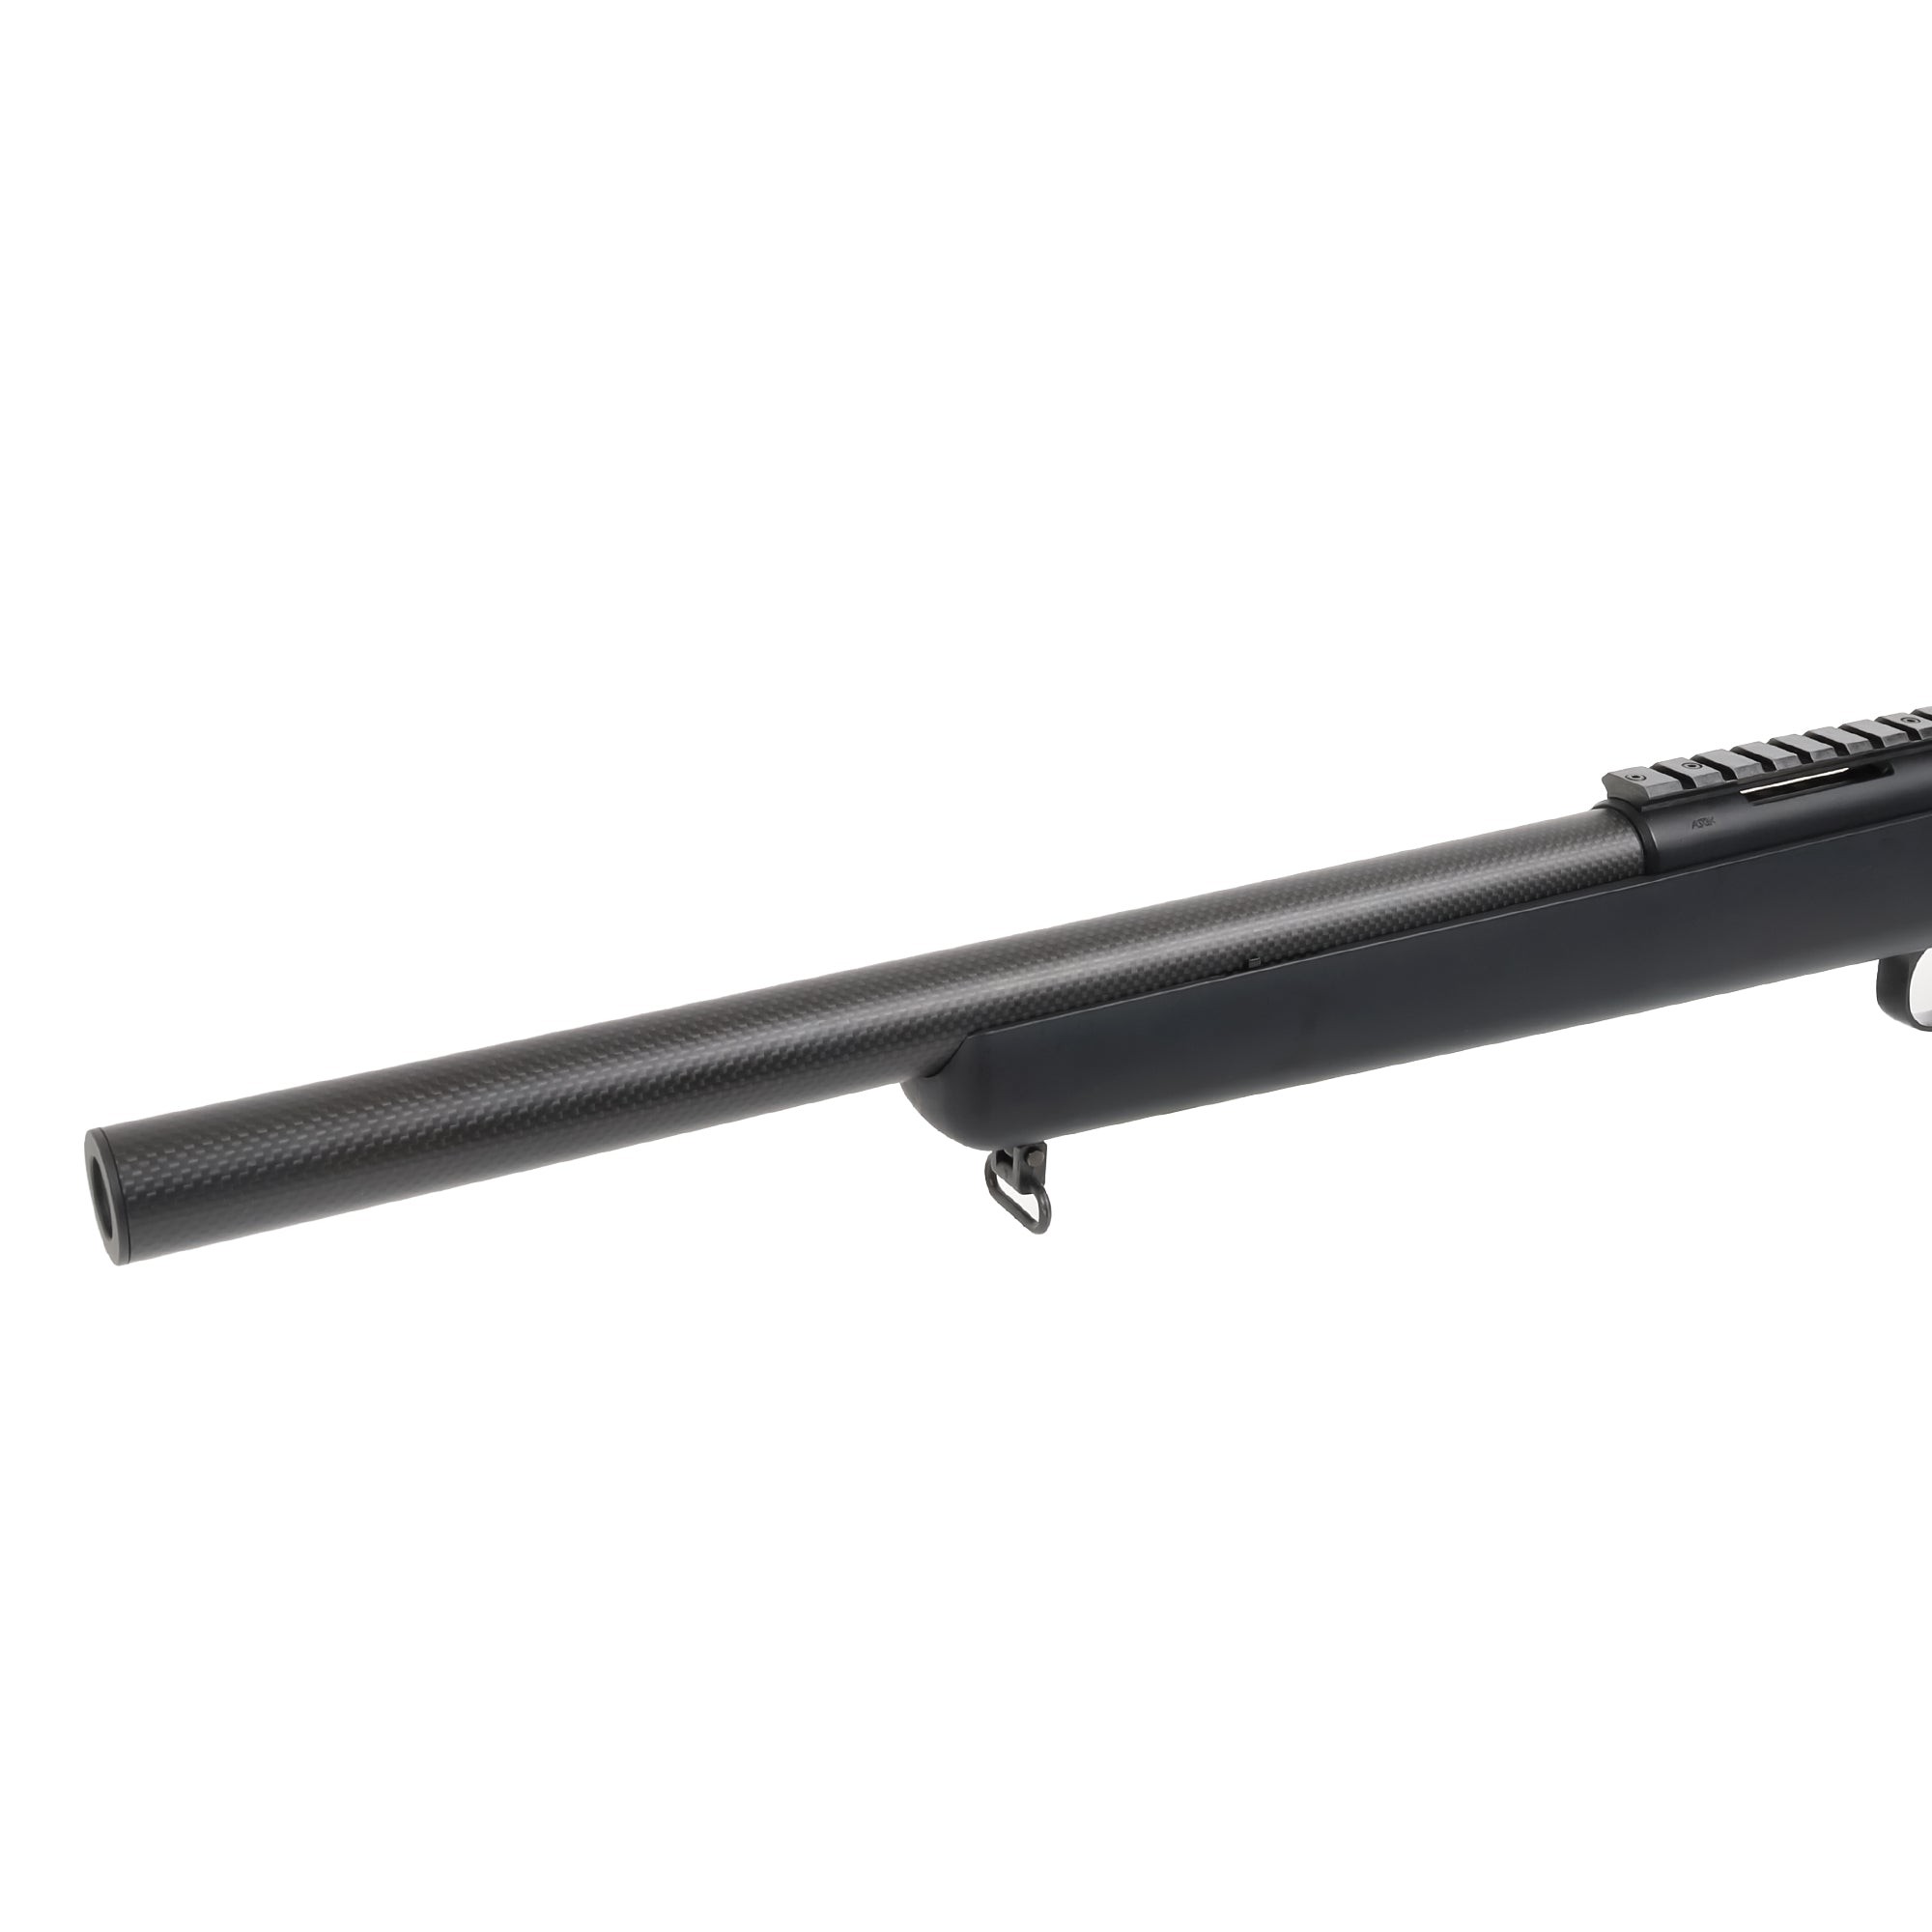 VSR-10 G Spec Carbon Outer Barrel [PSS] [Scheduled to be released in December! Now accepting reservations]